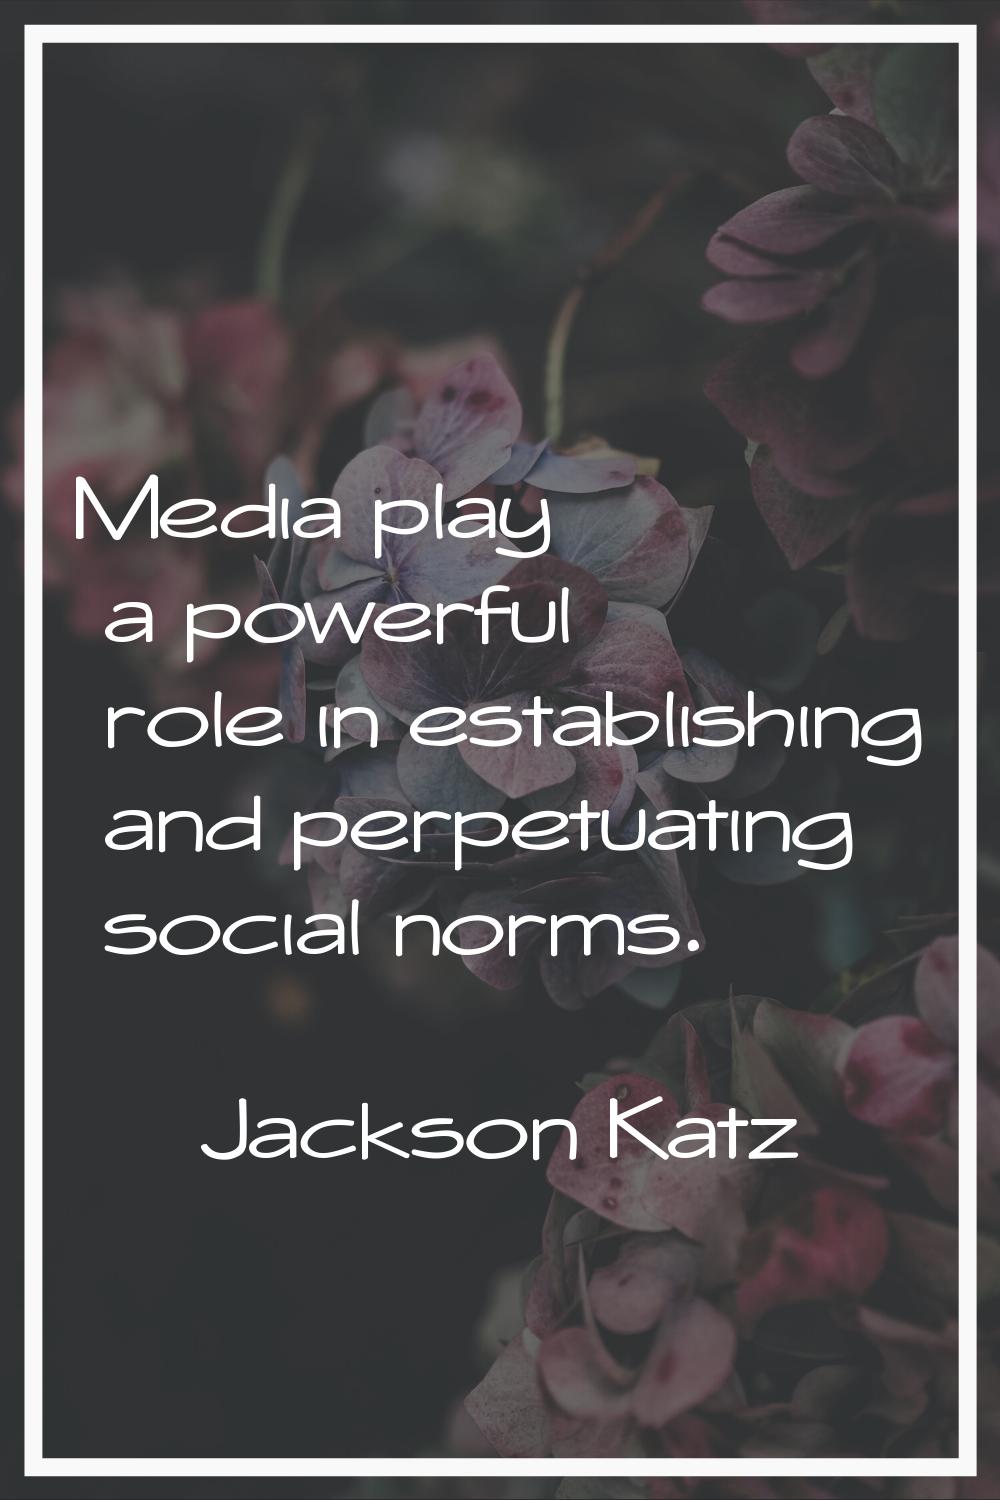 Media play a powerful role in establishing and perpetuating social norms.